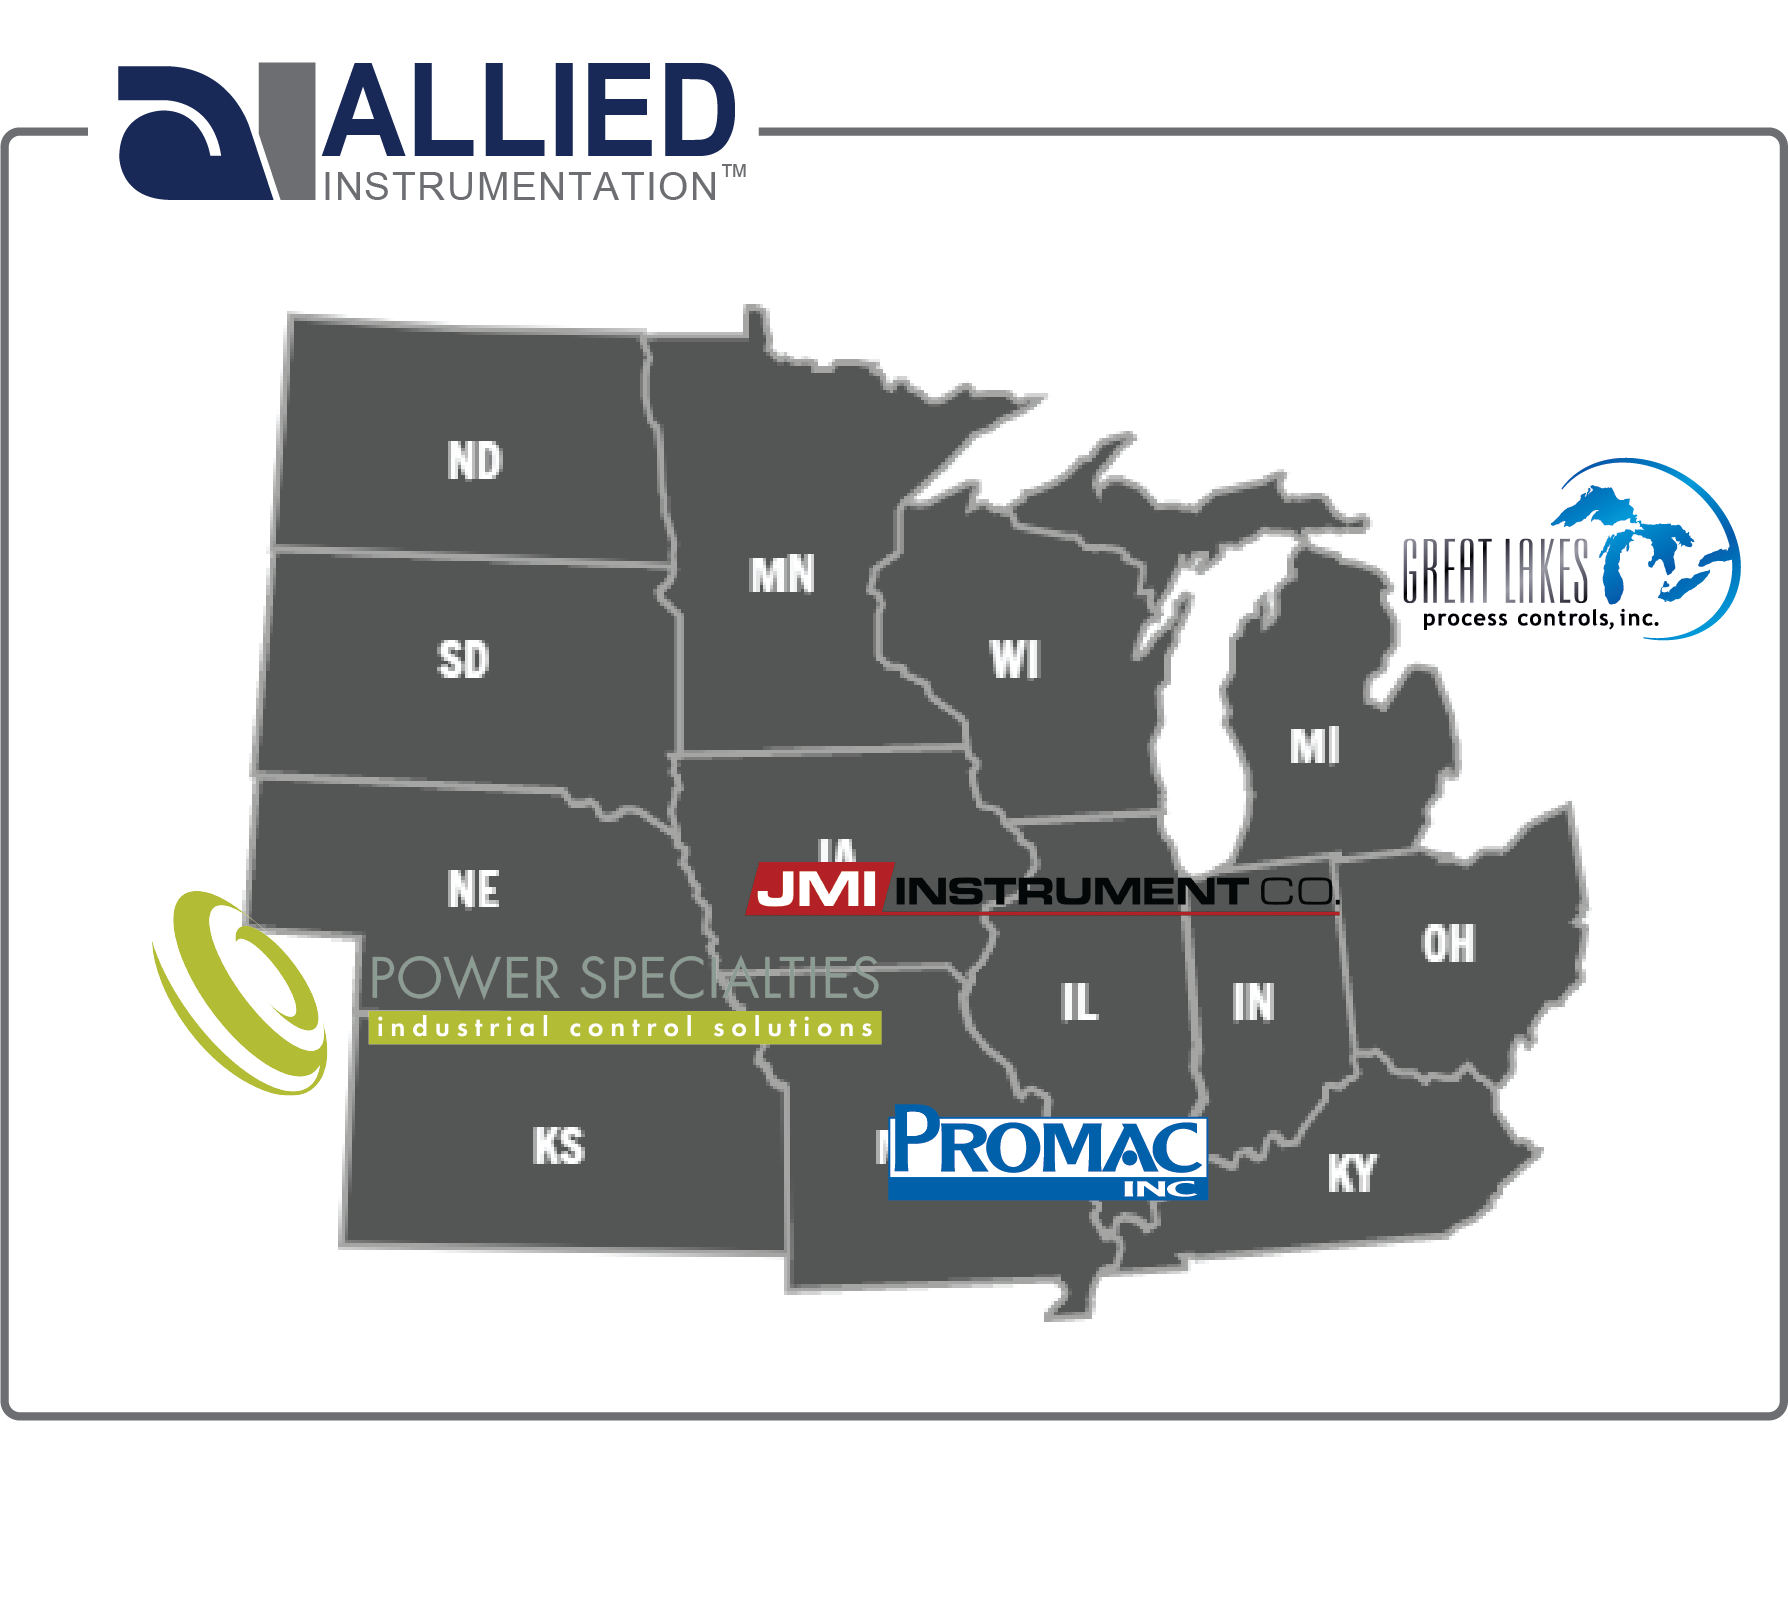 Image for Great Lakes Process Controls, Inc. Joins Recent Acquisitions by Allied Valve, Inc. to Expand its World-Class Process Instrumentation and Service Solutions Company